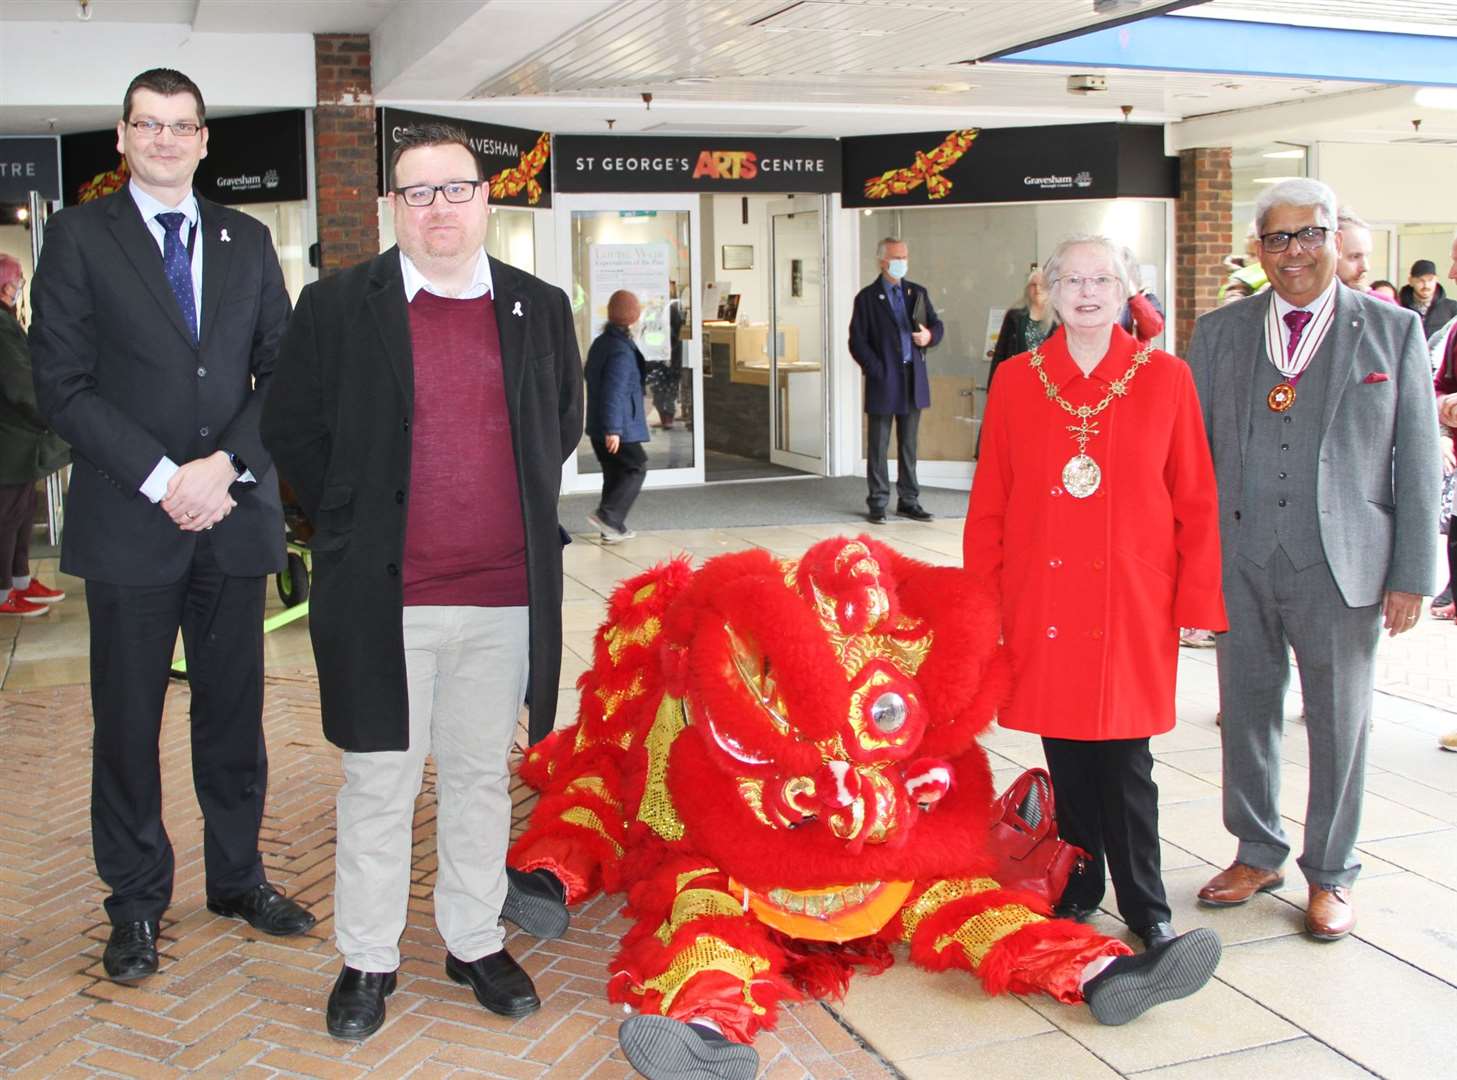 From left: Chief executive of the council Stuart Bobby, Cllr Shane Mochrie-Cox, Cllr Lyn Milner and deputy lord lieutenant of Kent Dr Bhargawa Vasudaven. Picture: Gravesham Borough Council